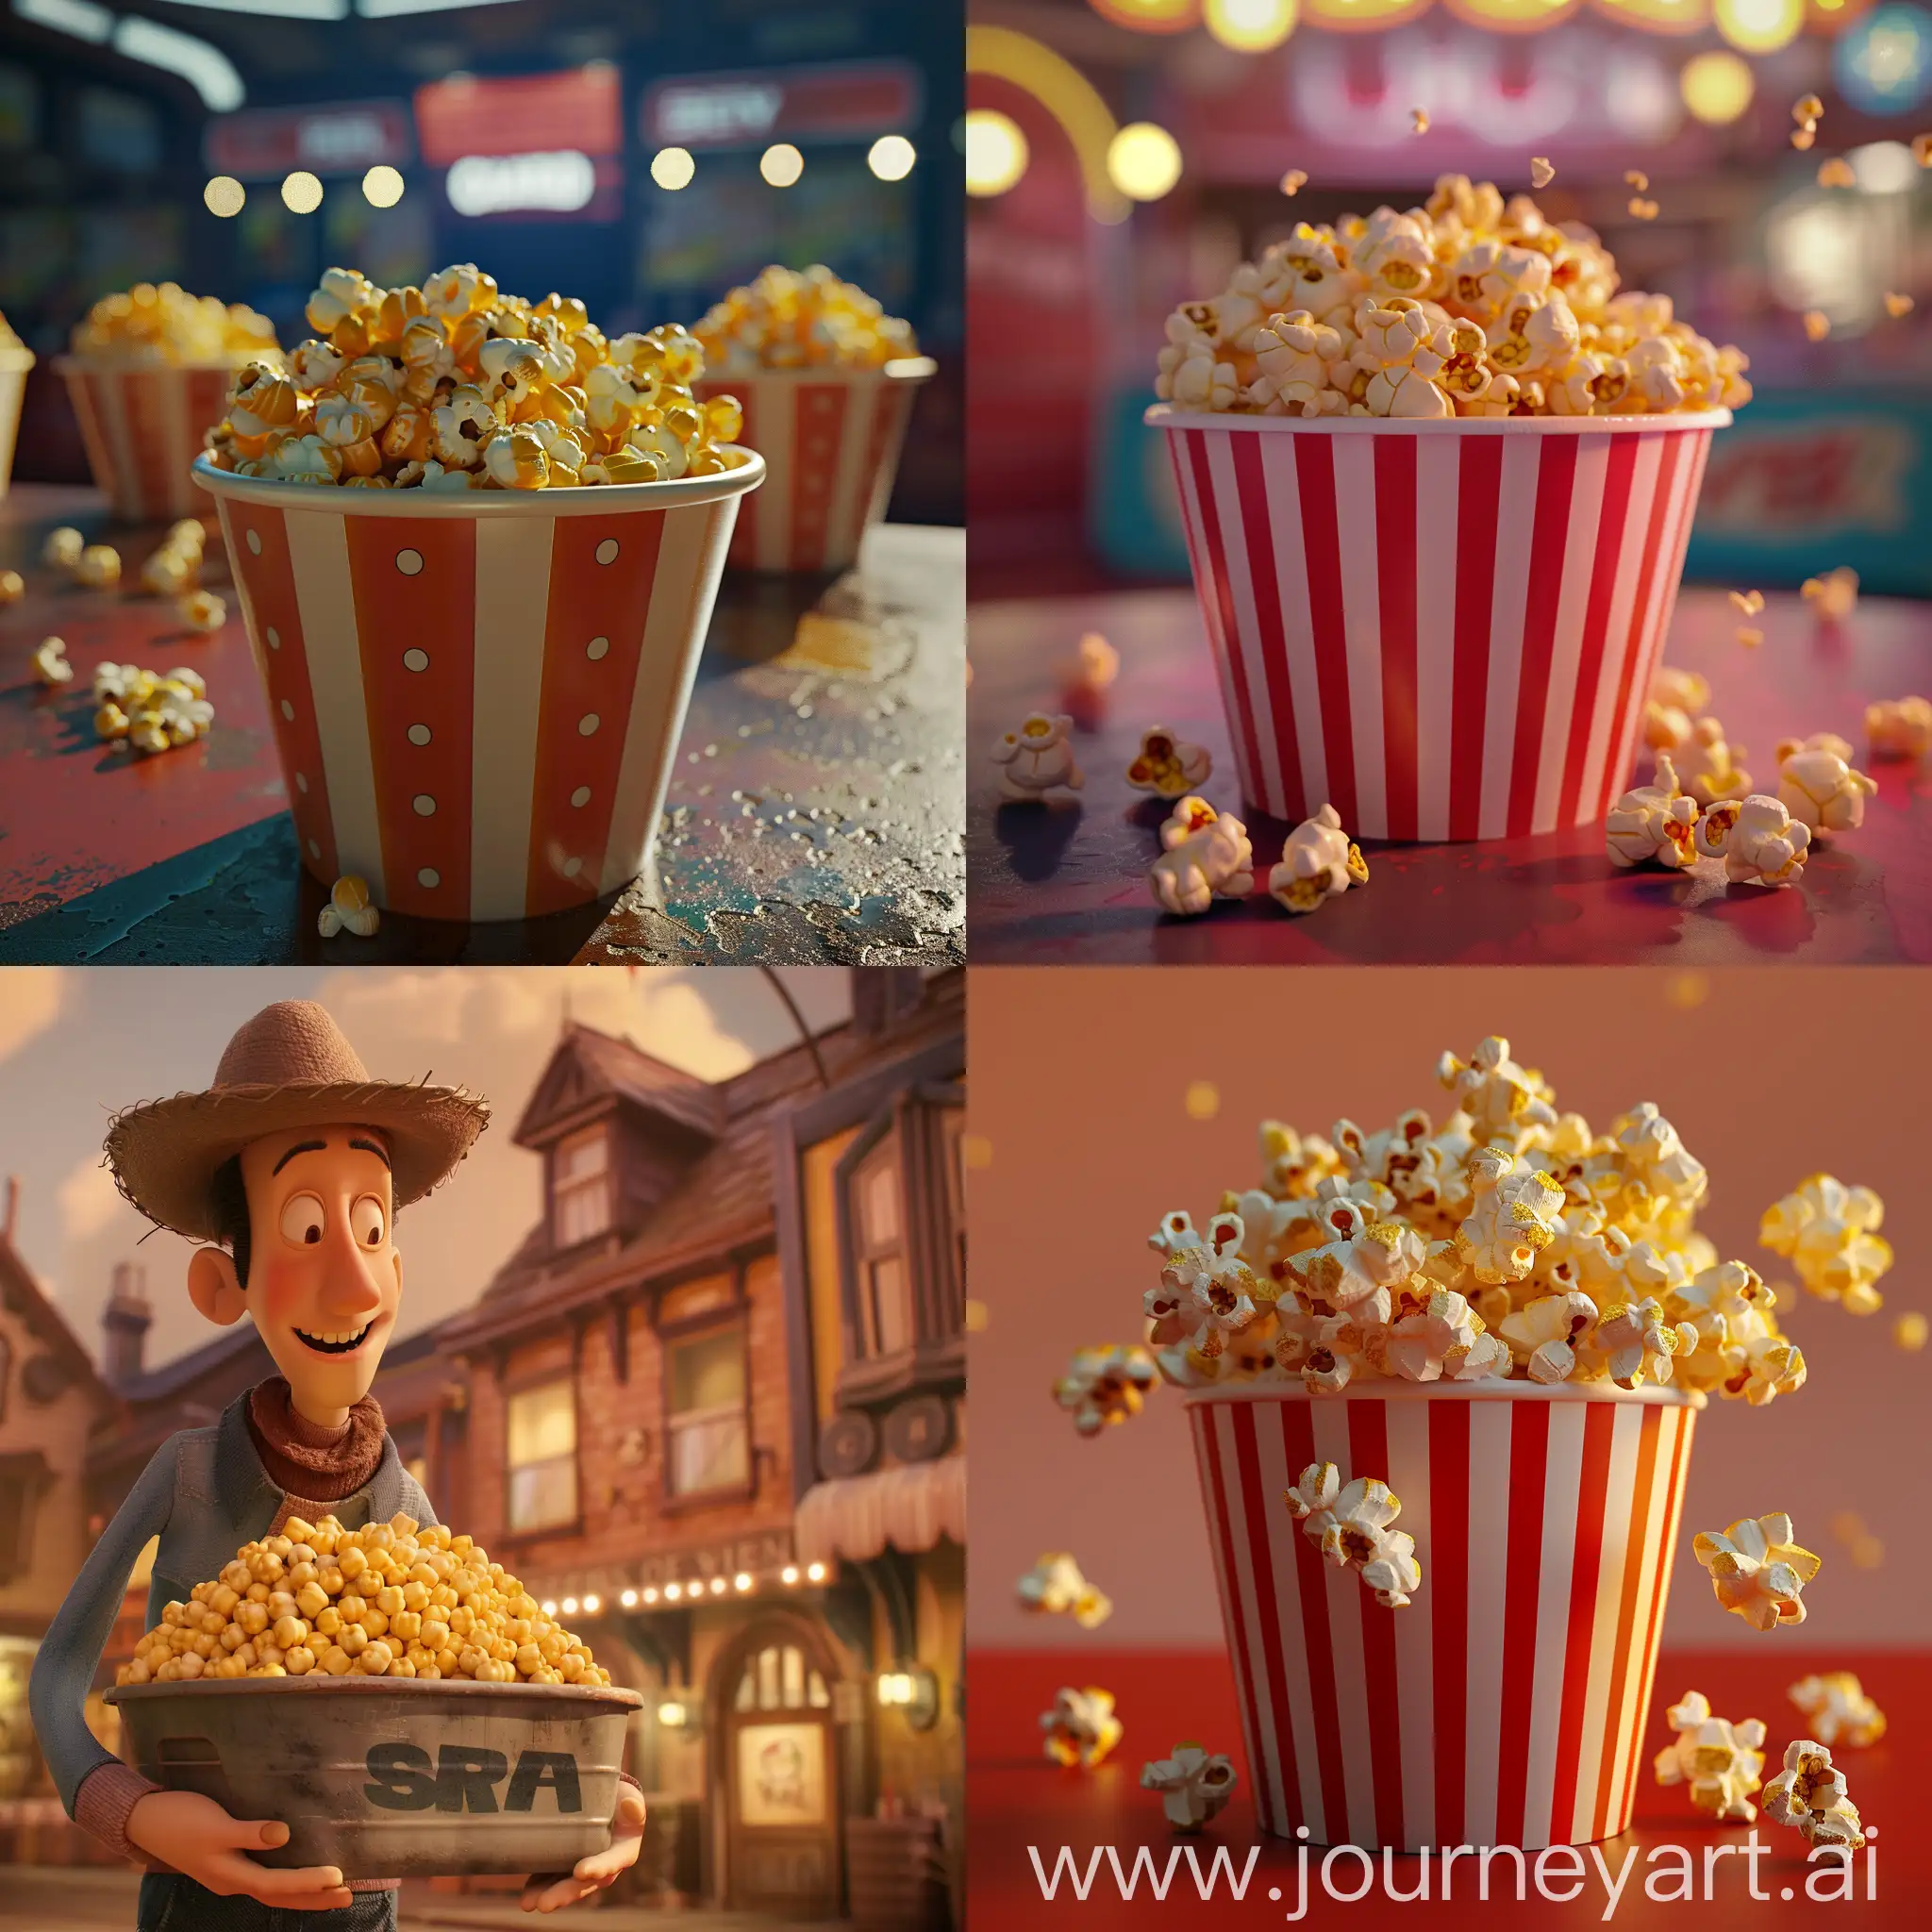 A bucket of corn being sold at the cinema :: 3D animation